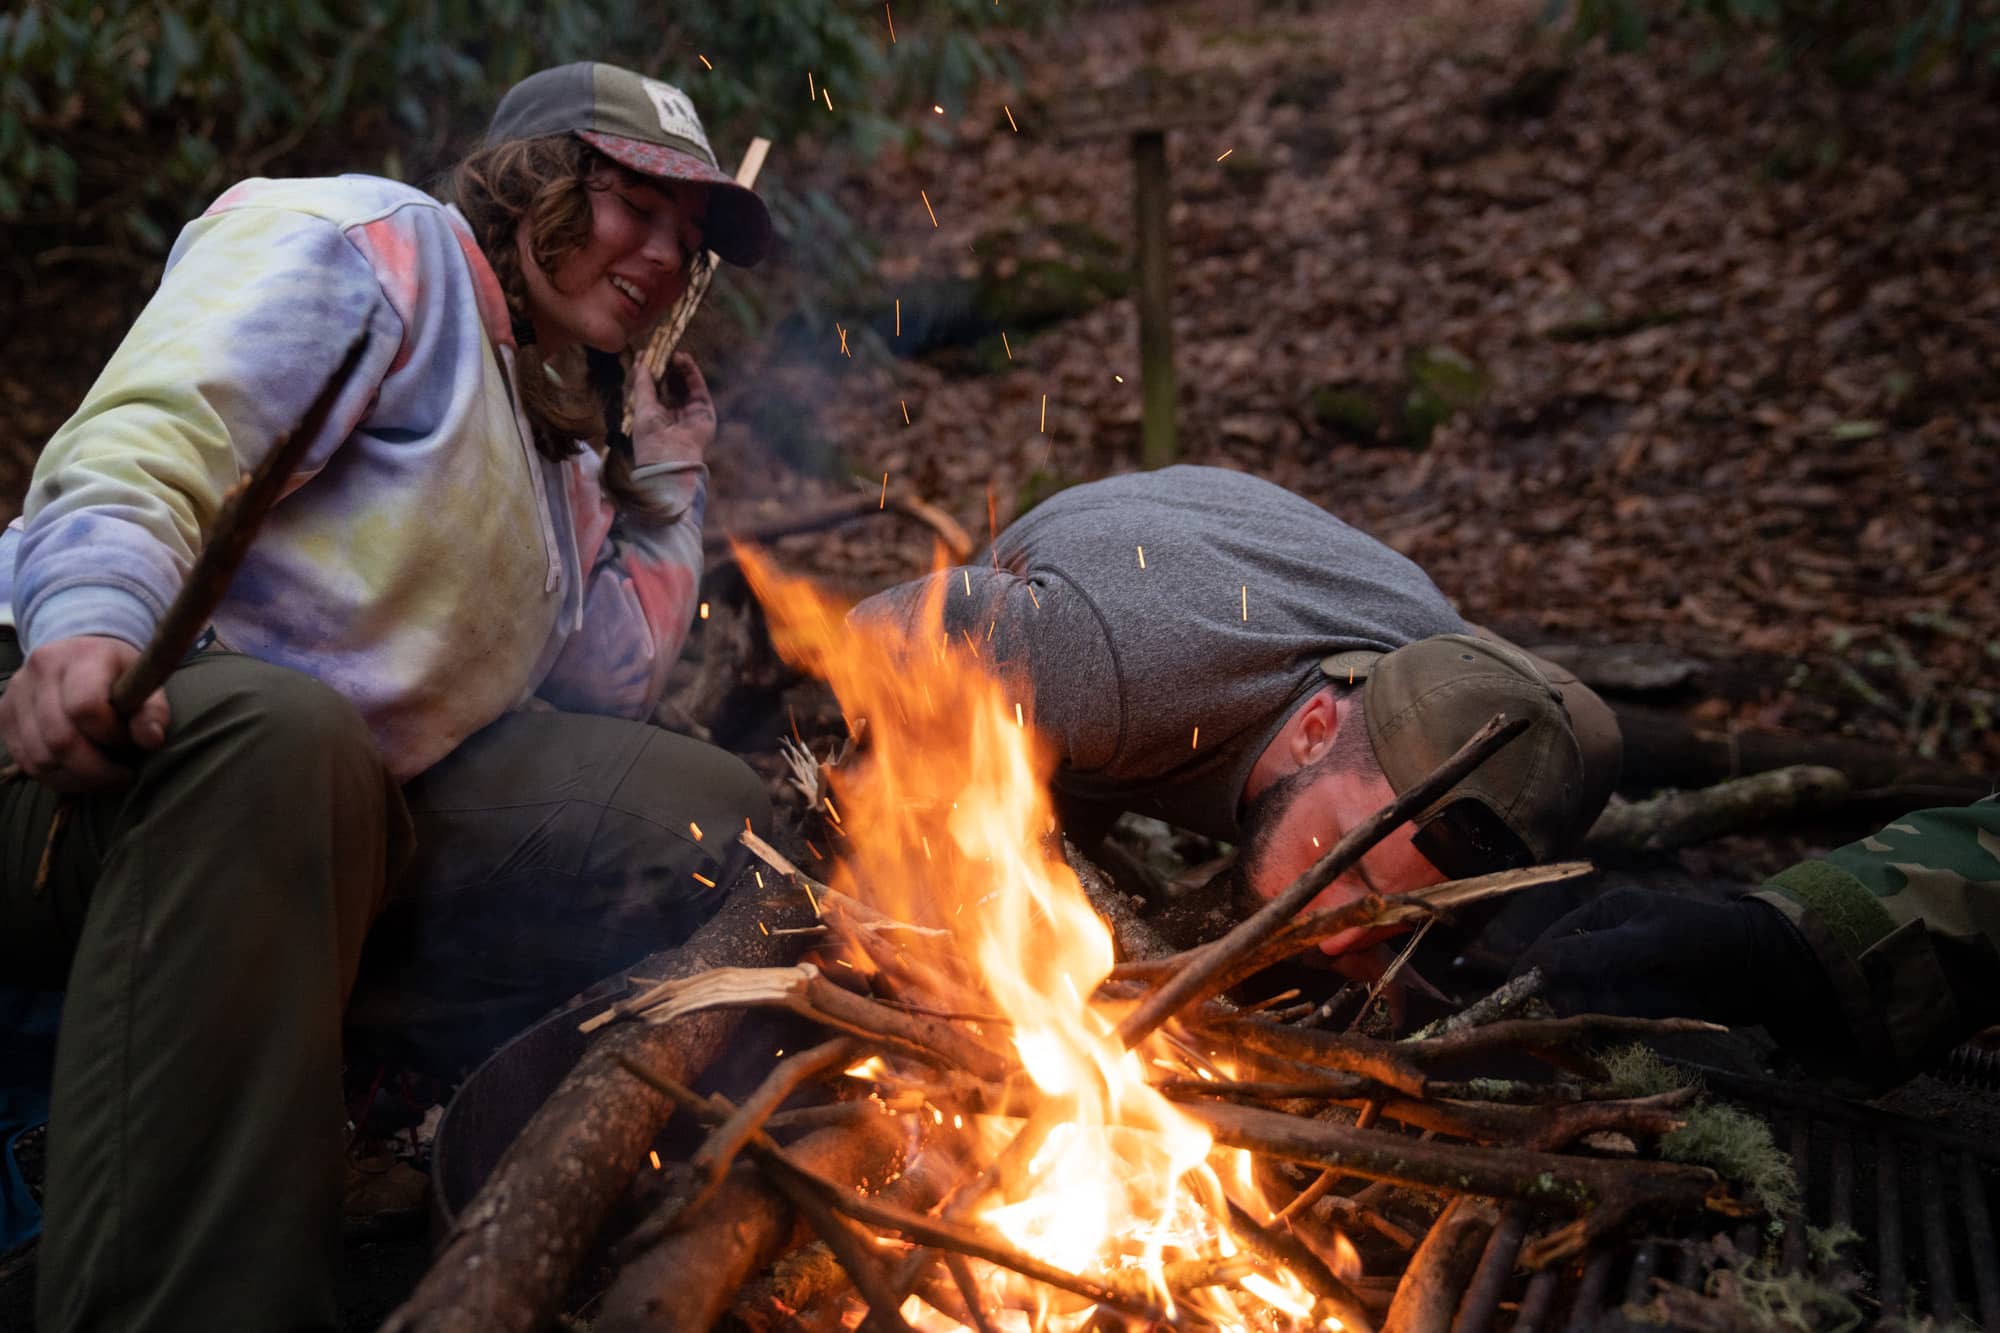 Helena Karlstrom and Eamonn Bell work hard to keep the campfire going during their fifth day backpacking a section of the Appalachian Trail in the Nantahala National Forest on Wednesday, March 9, 2022, at the Cold Springs Shelter near Franklin, North Carolina.